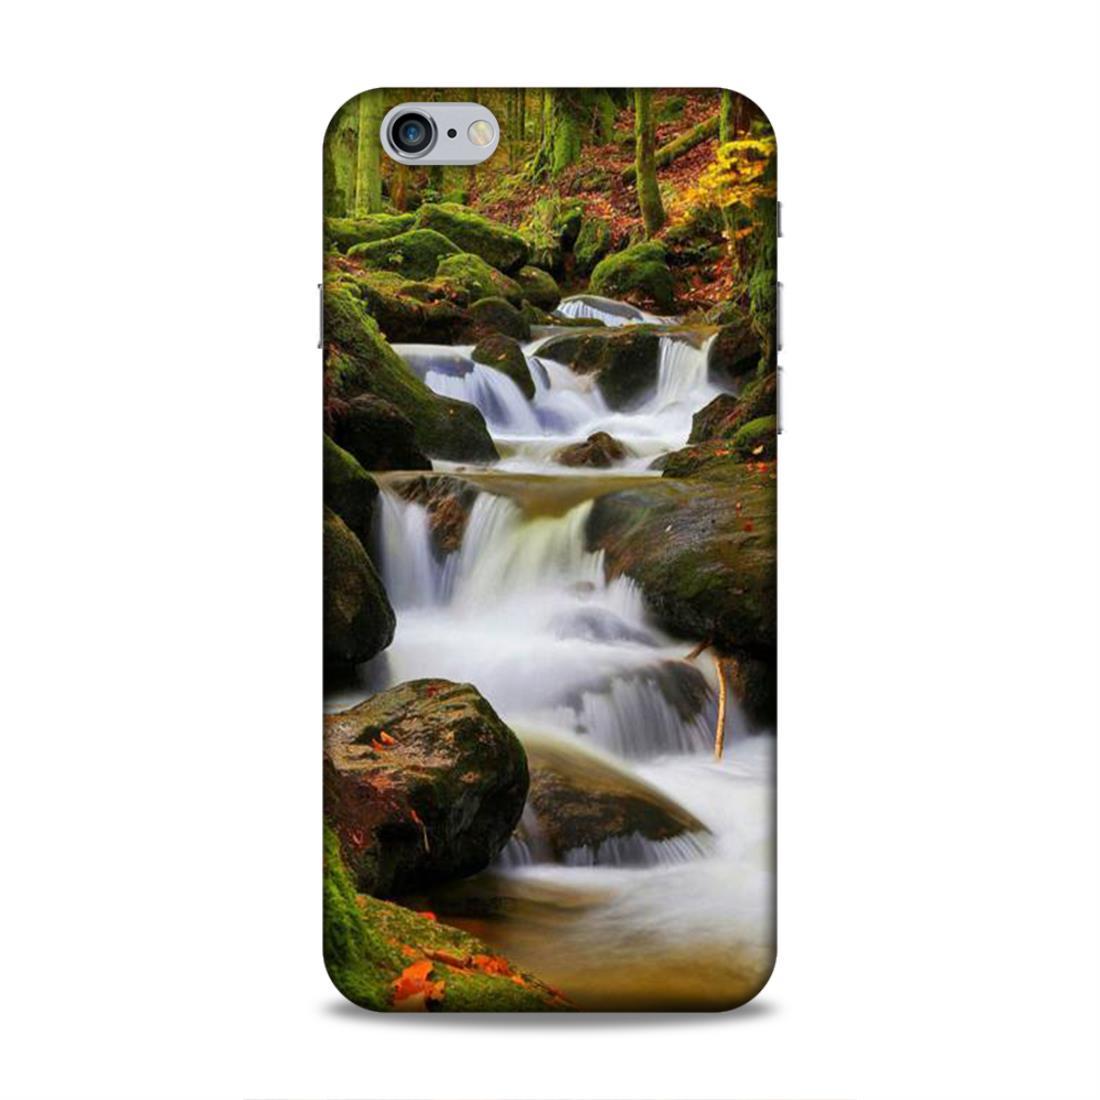 Natural Waterfall iPhone 6 Plus Phone Cover Case